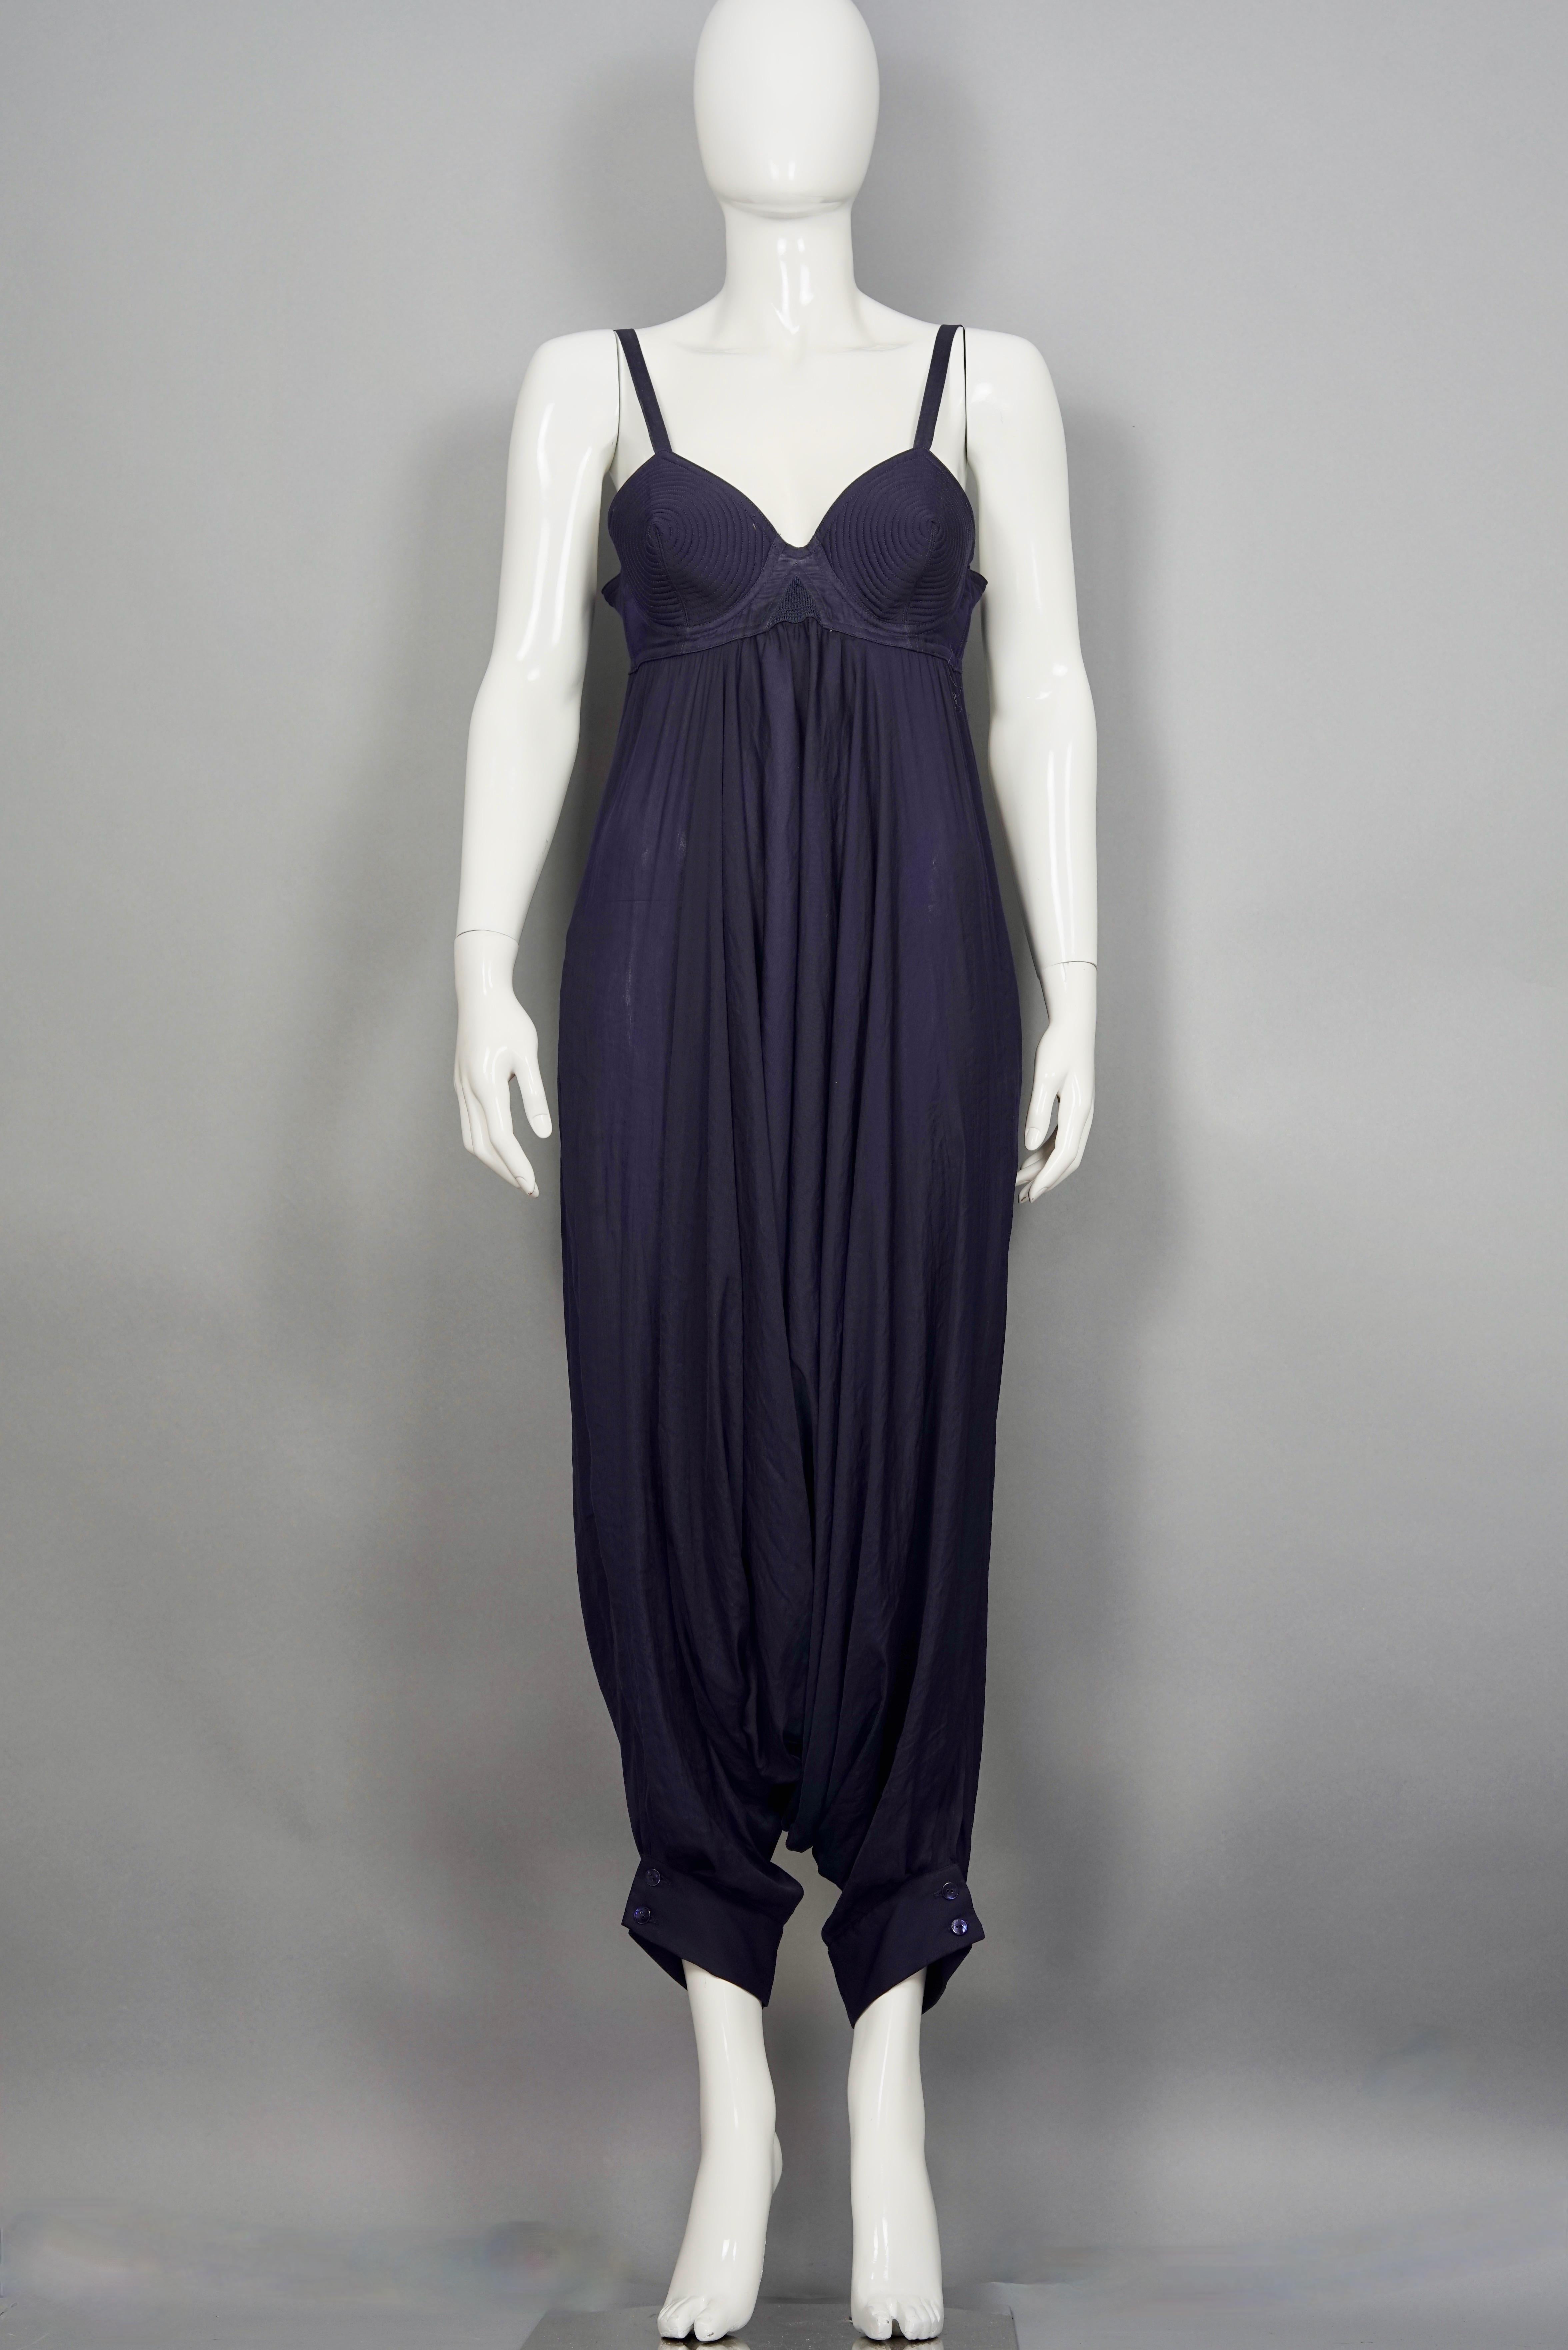 Vintage JEAN PAUL GAULTIER Madonna Cone Bra Open Back Jumpsuit

Measurements:
Bust: 31.89 inches (81 cm) elastic at back, slightly adjustable
Waist: FREE
Hips: FREE
Length: 42.51 inches (108 cm)

Features
- 100% Authentic JEAN PAUL GAULTIER.
-